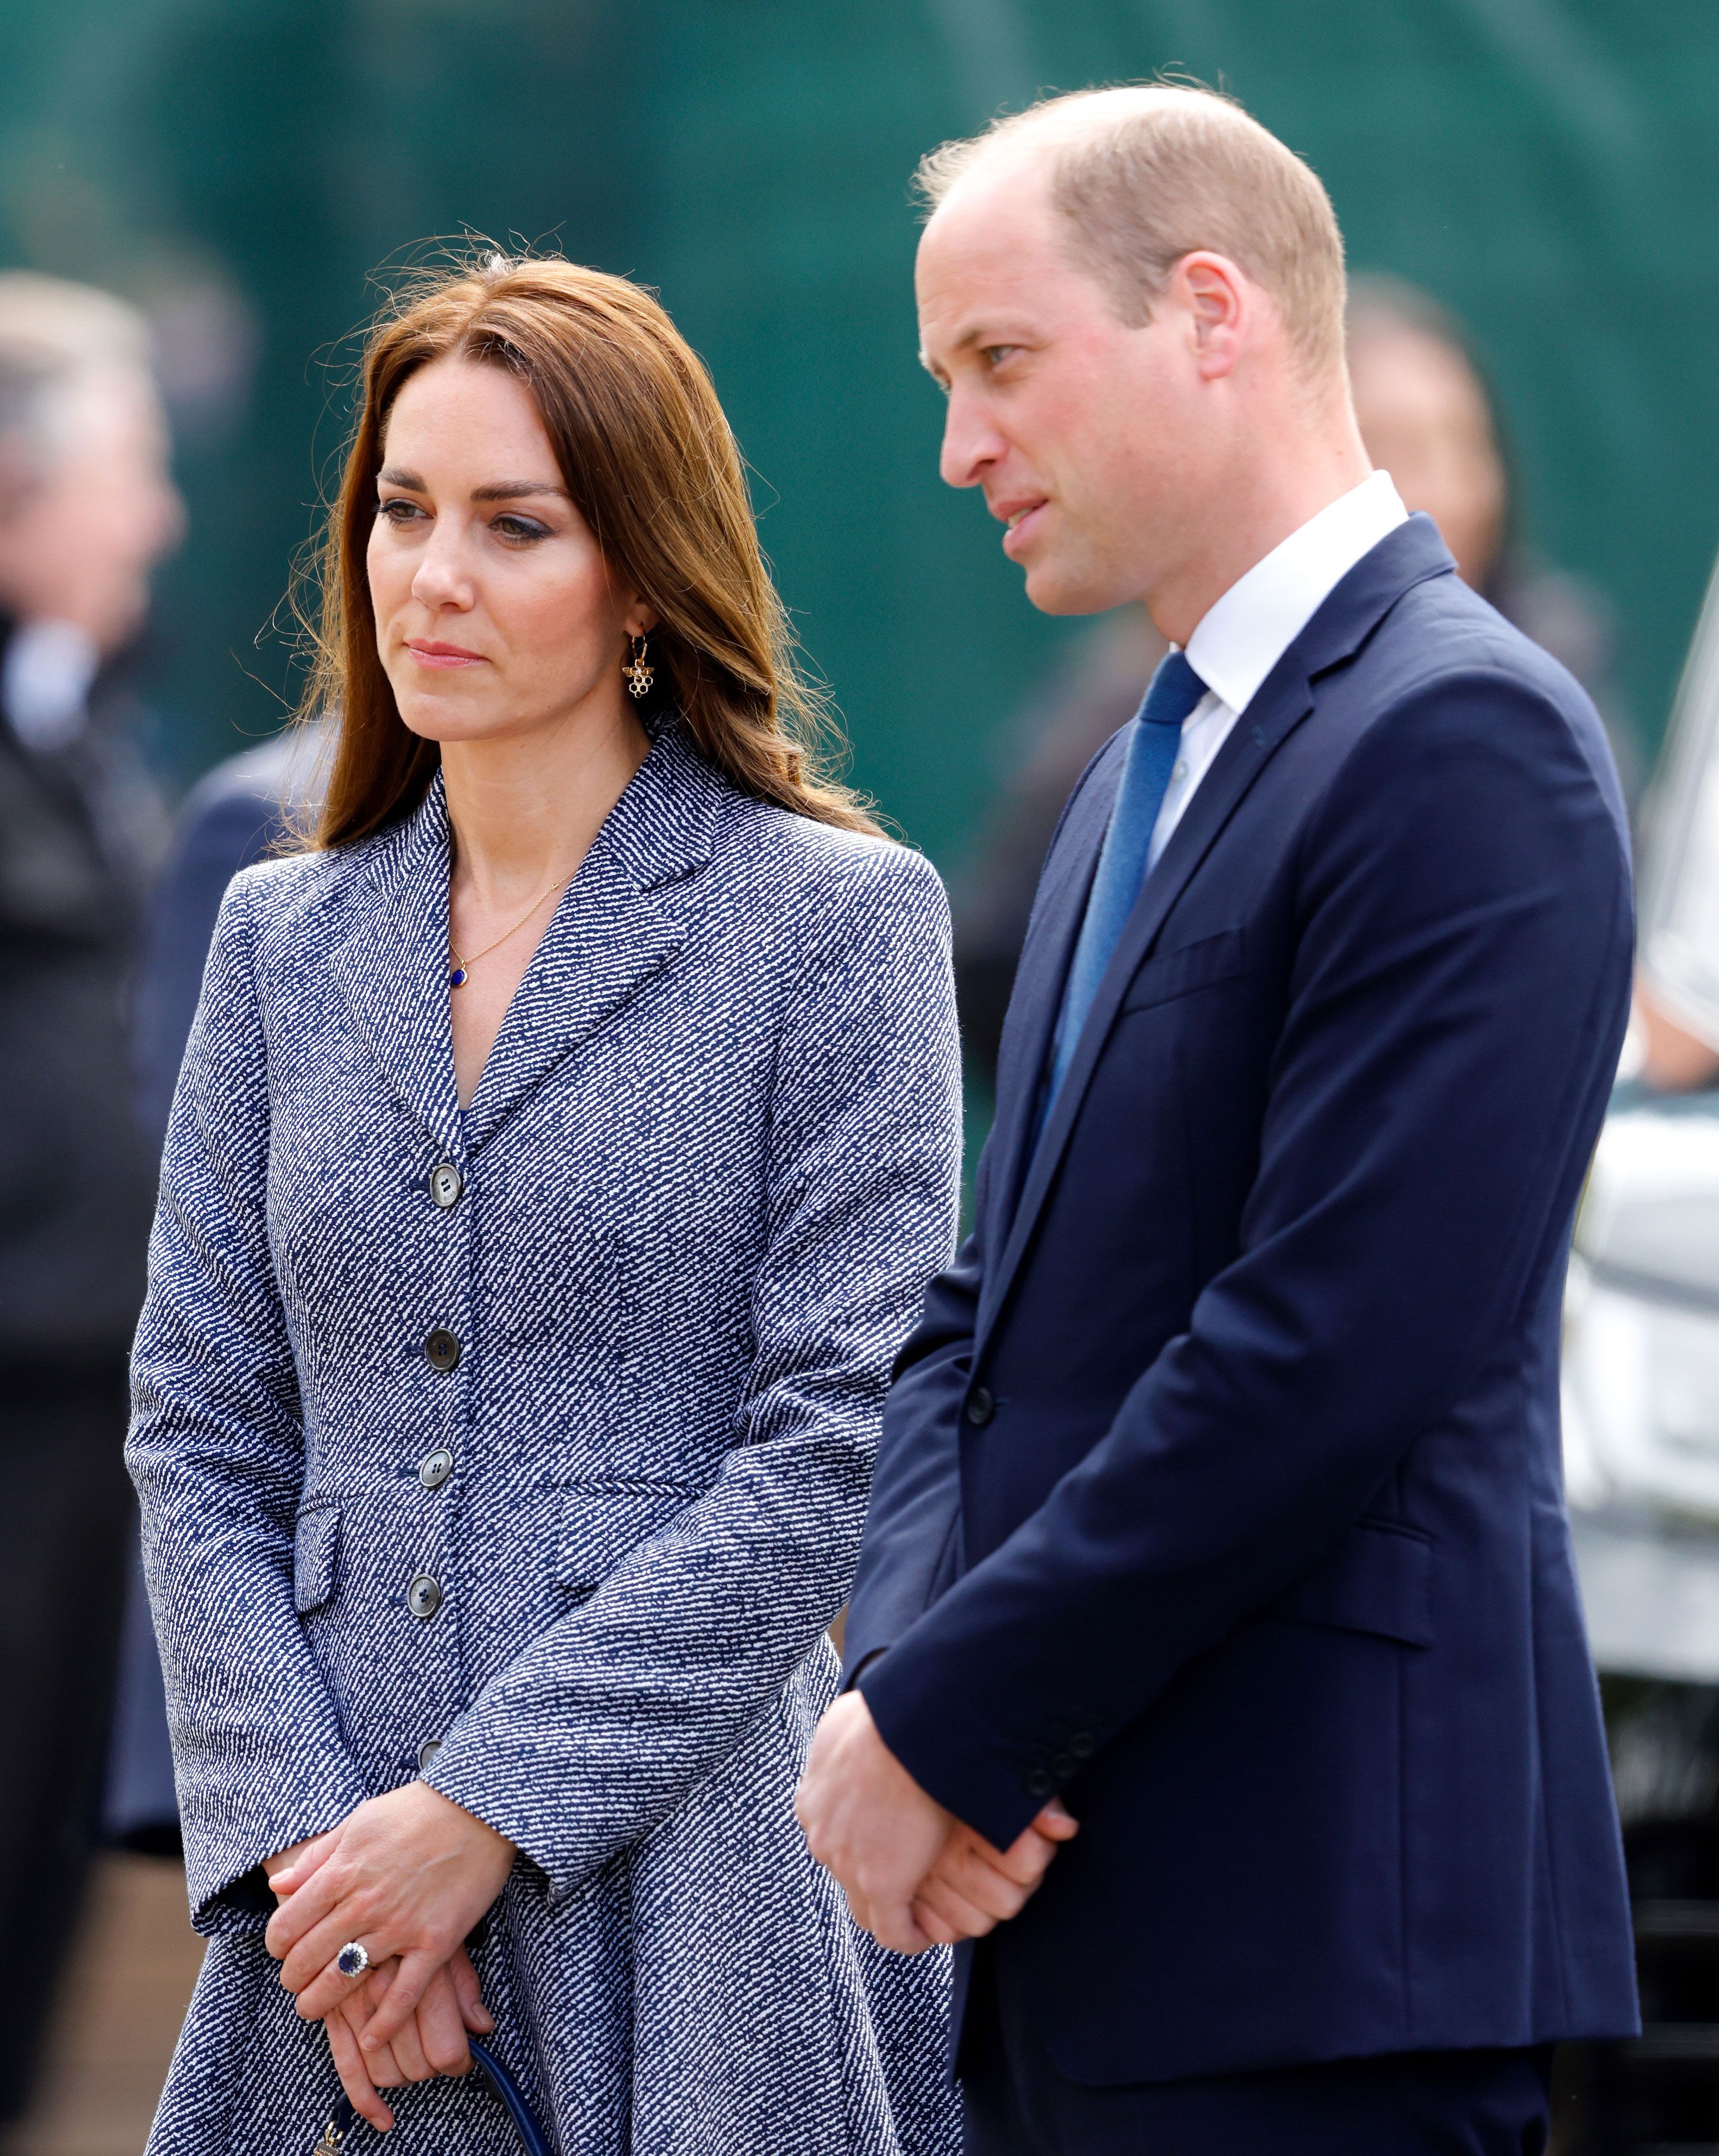 Prince William And Kate's Divorce - Here's The Truth!